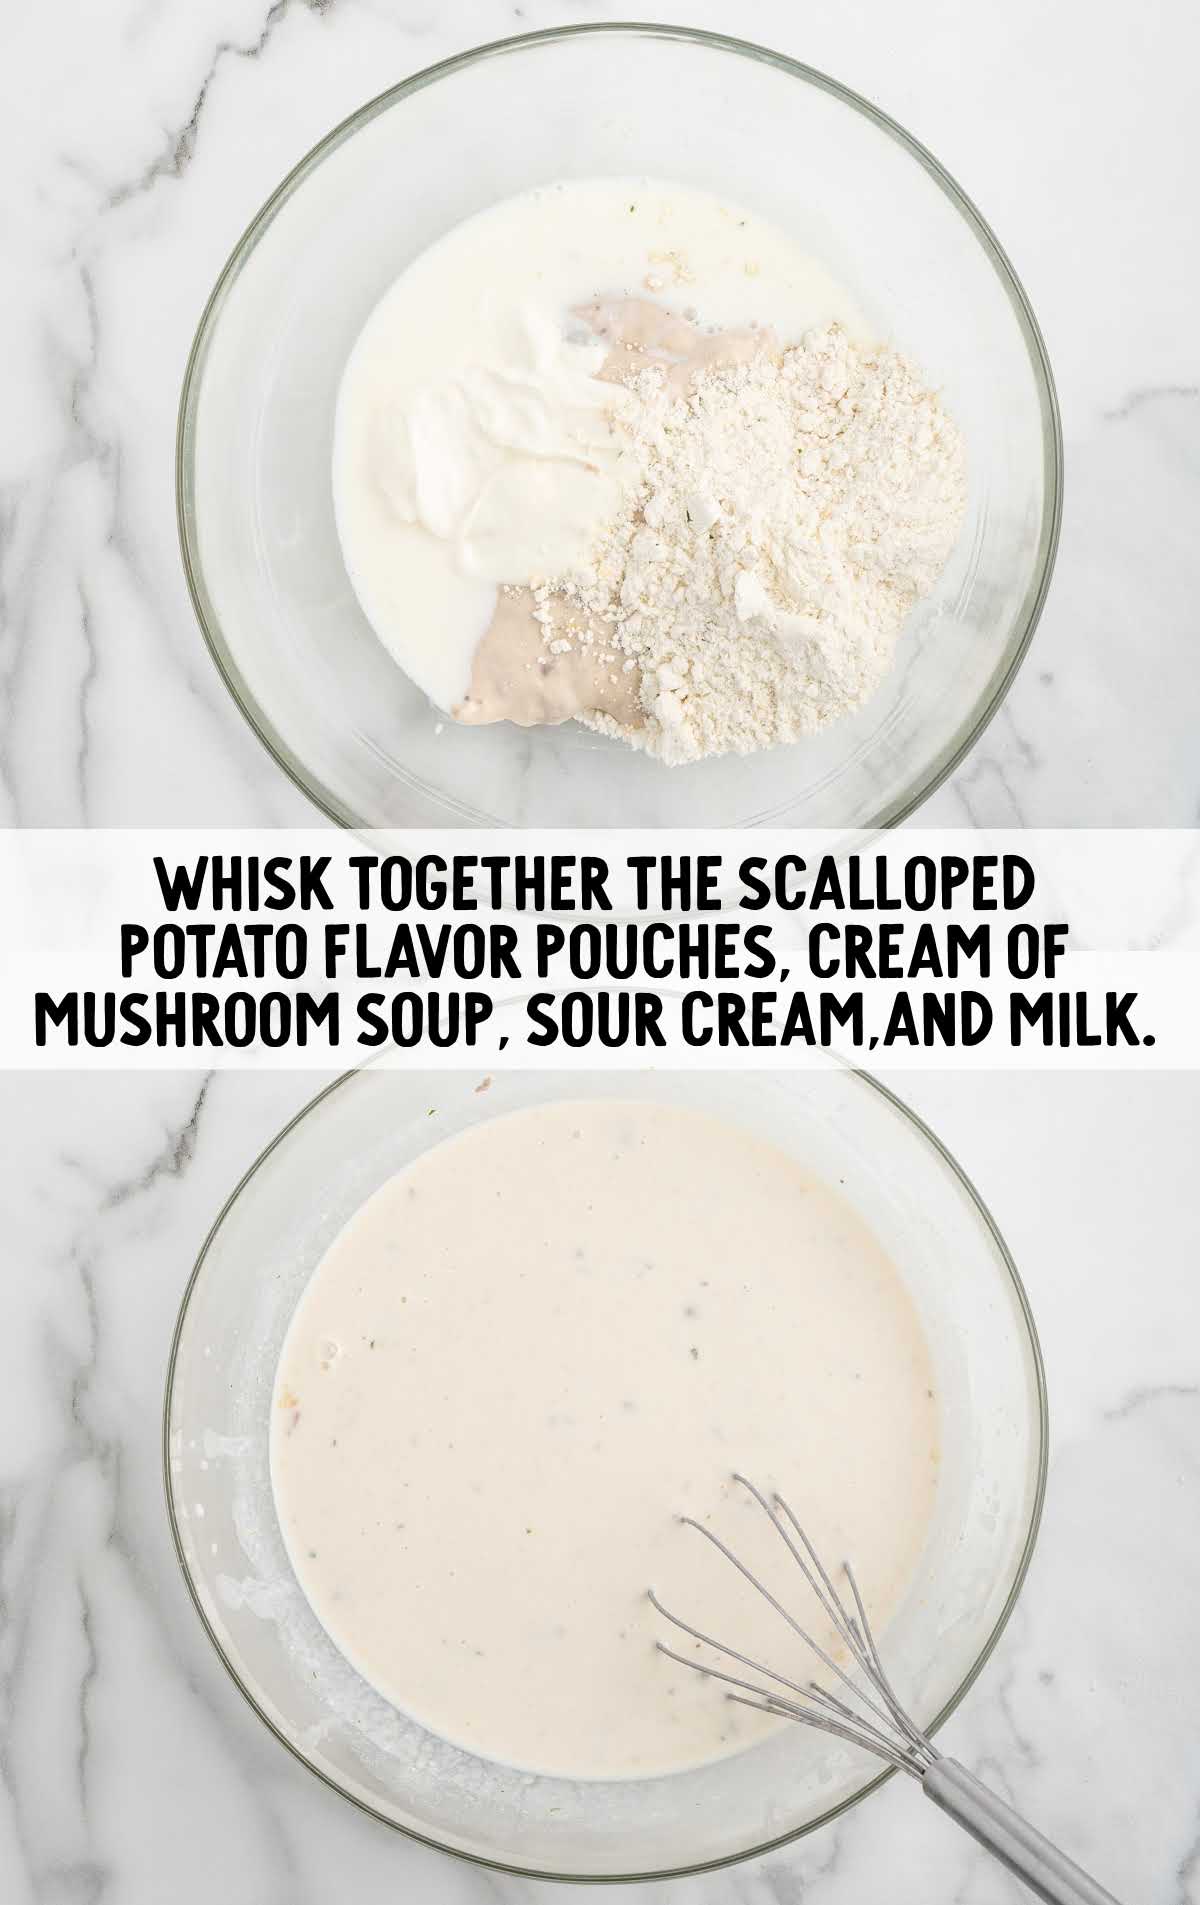 soup, sour cream, hot milk, and the flavor pouches from the scalloped potatoes combined in a bowl